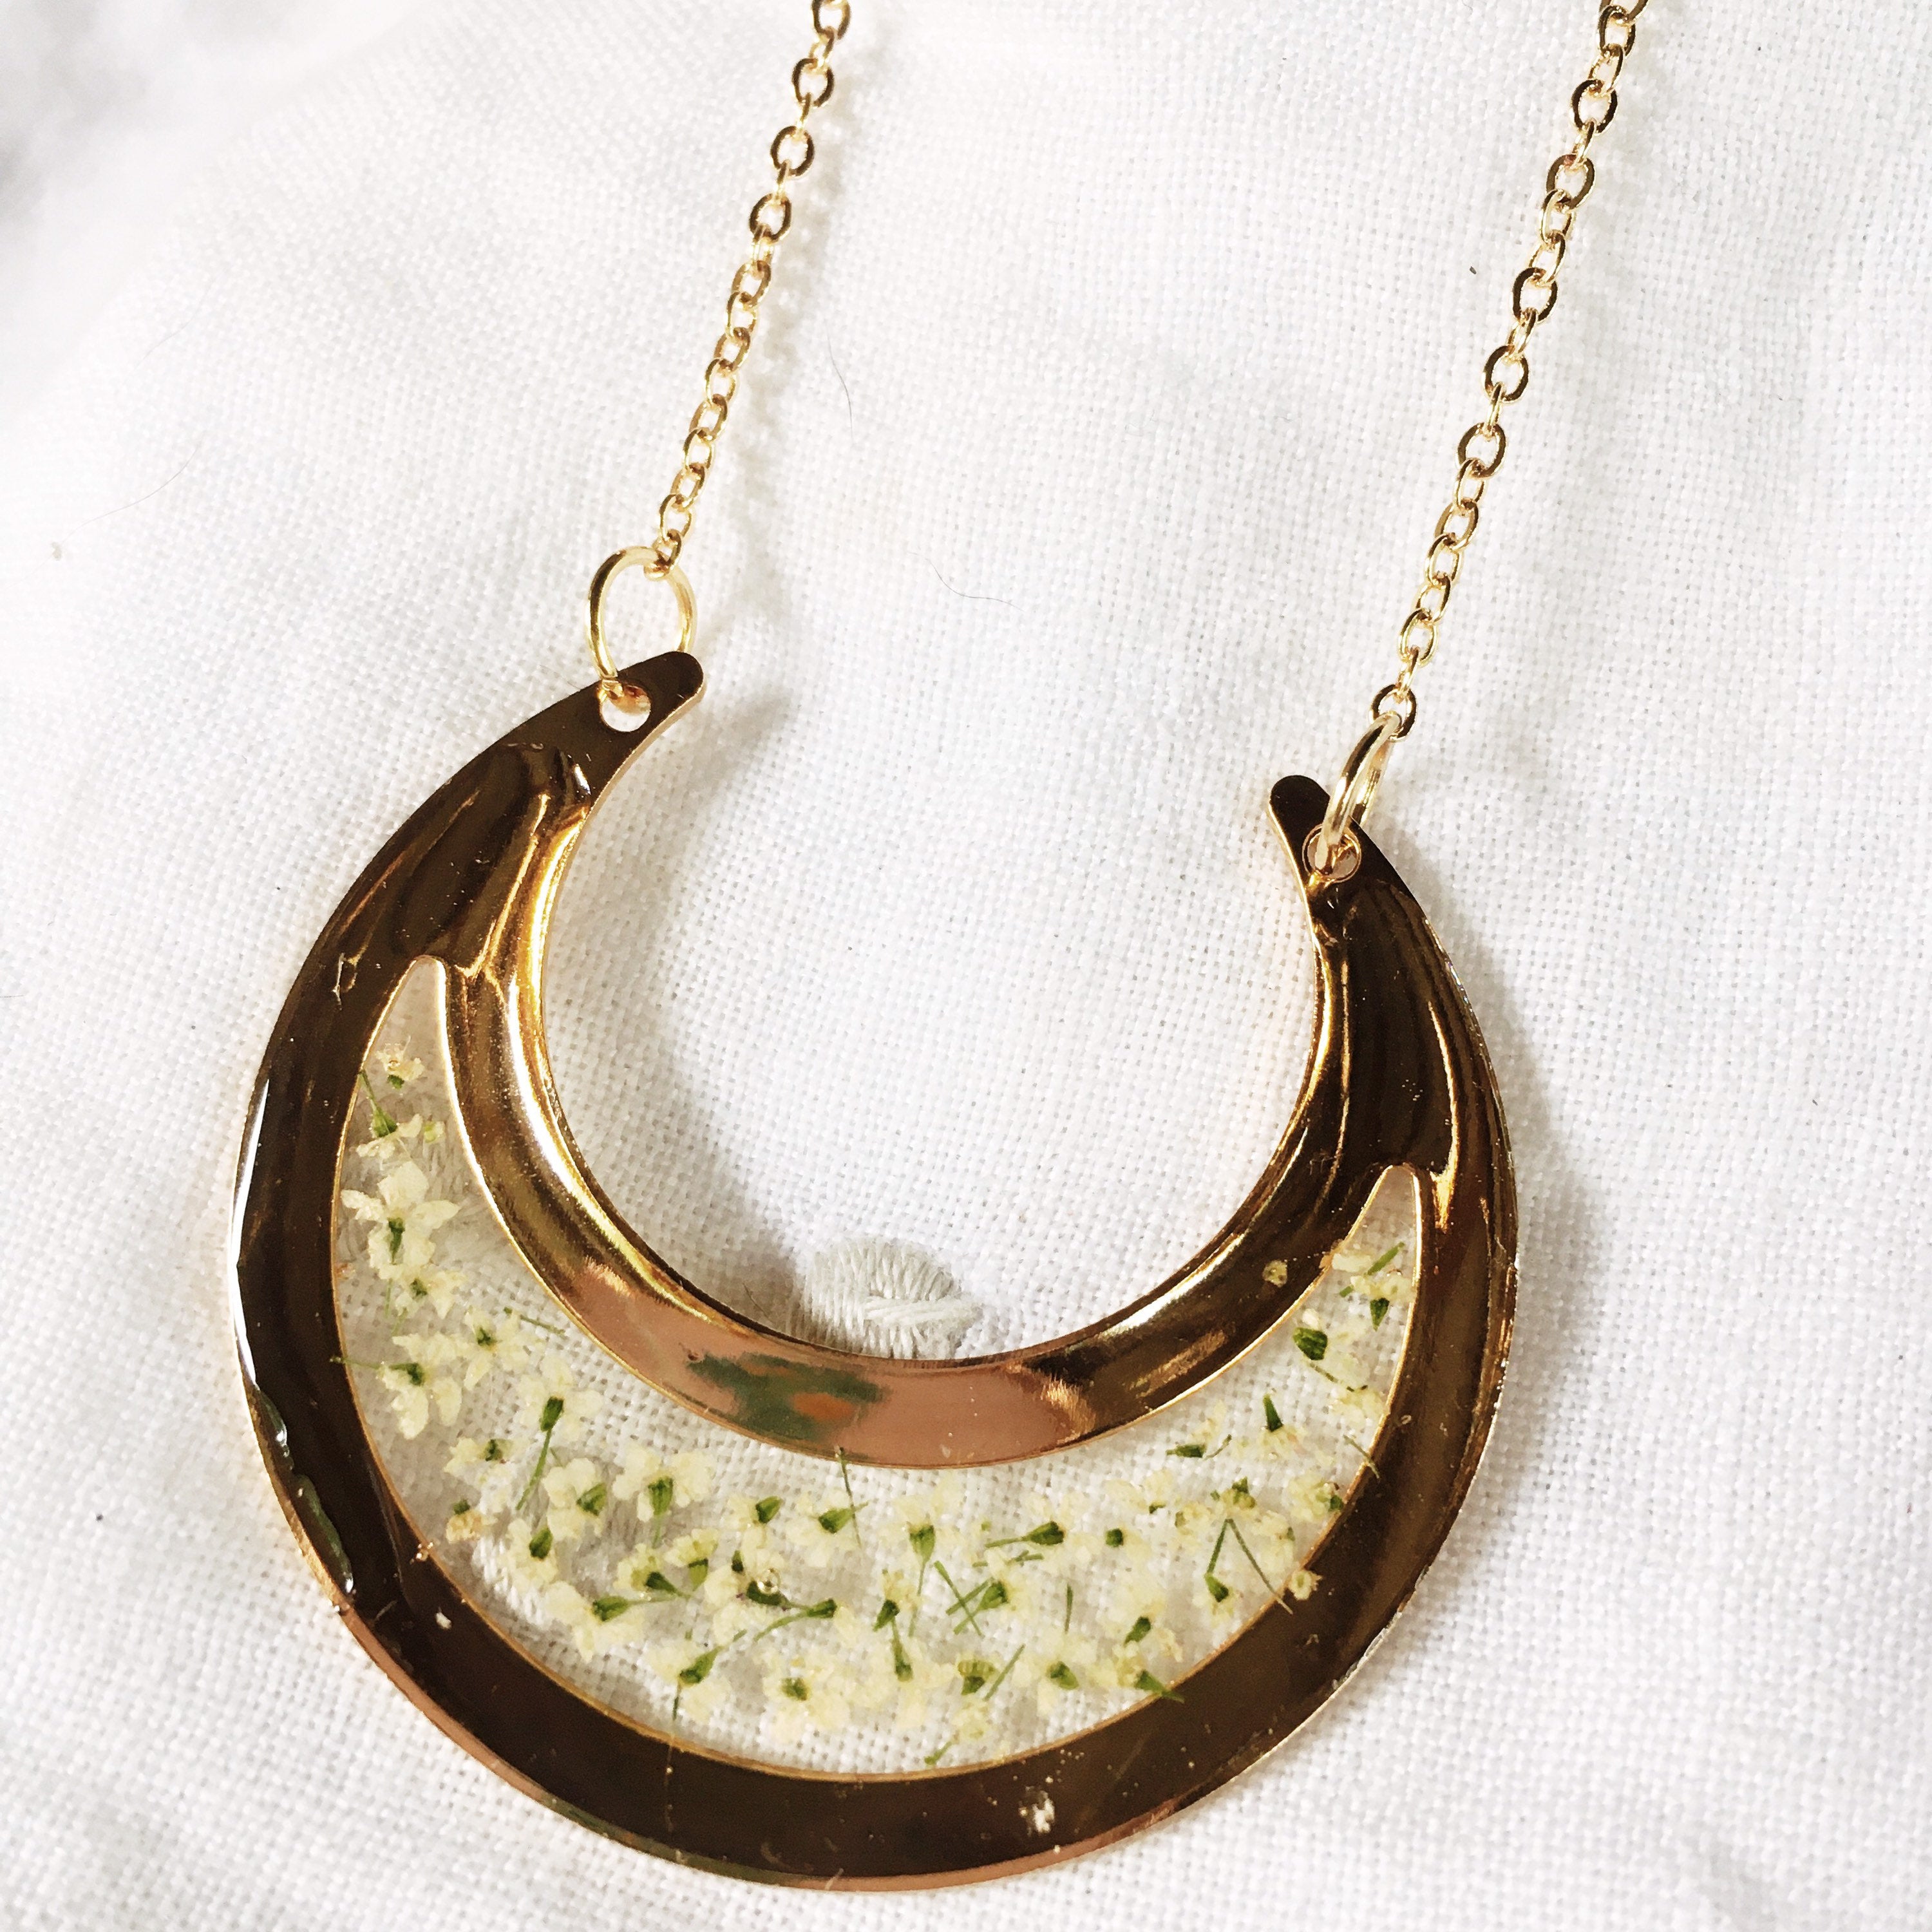 Crescent City Chic - Gold Crescent Moon Necklace with Queen Anne's Lace